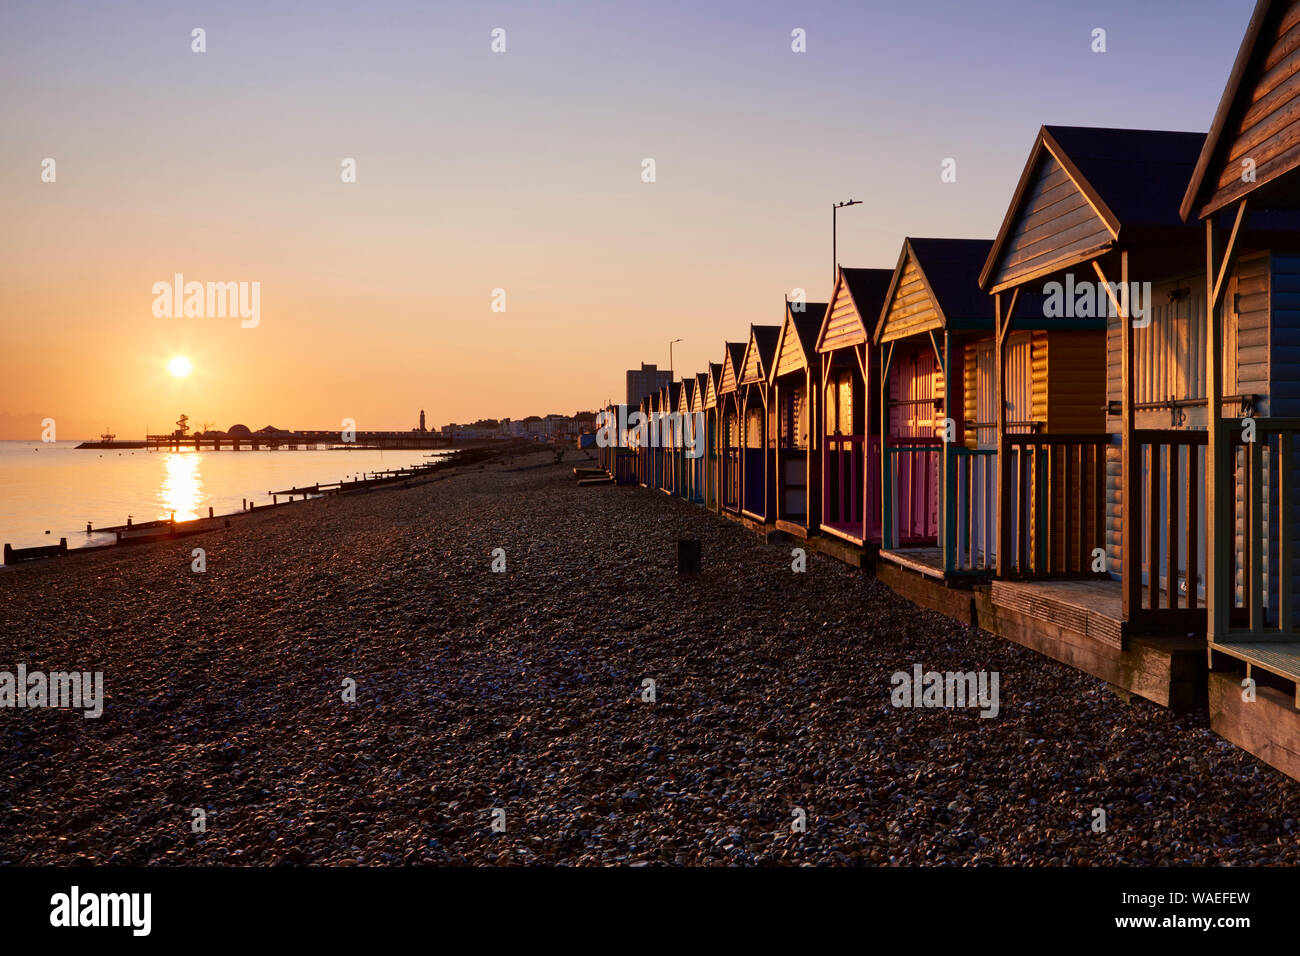 Herne Bay, Kent, UK. 20th August 2019: UK weather. Sunrise into clear skies over the pier at Herne bay lights up beach huts. The forecast is for hot sunny weather for the next few days and the bank holiday weekend which could cause some thunderstorms. Credit: Alan Payton/Alamy Live News Stock Photo